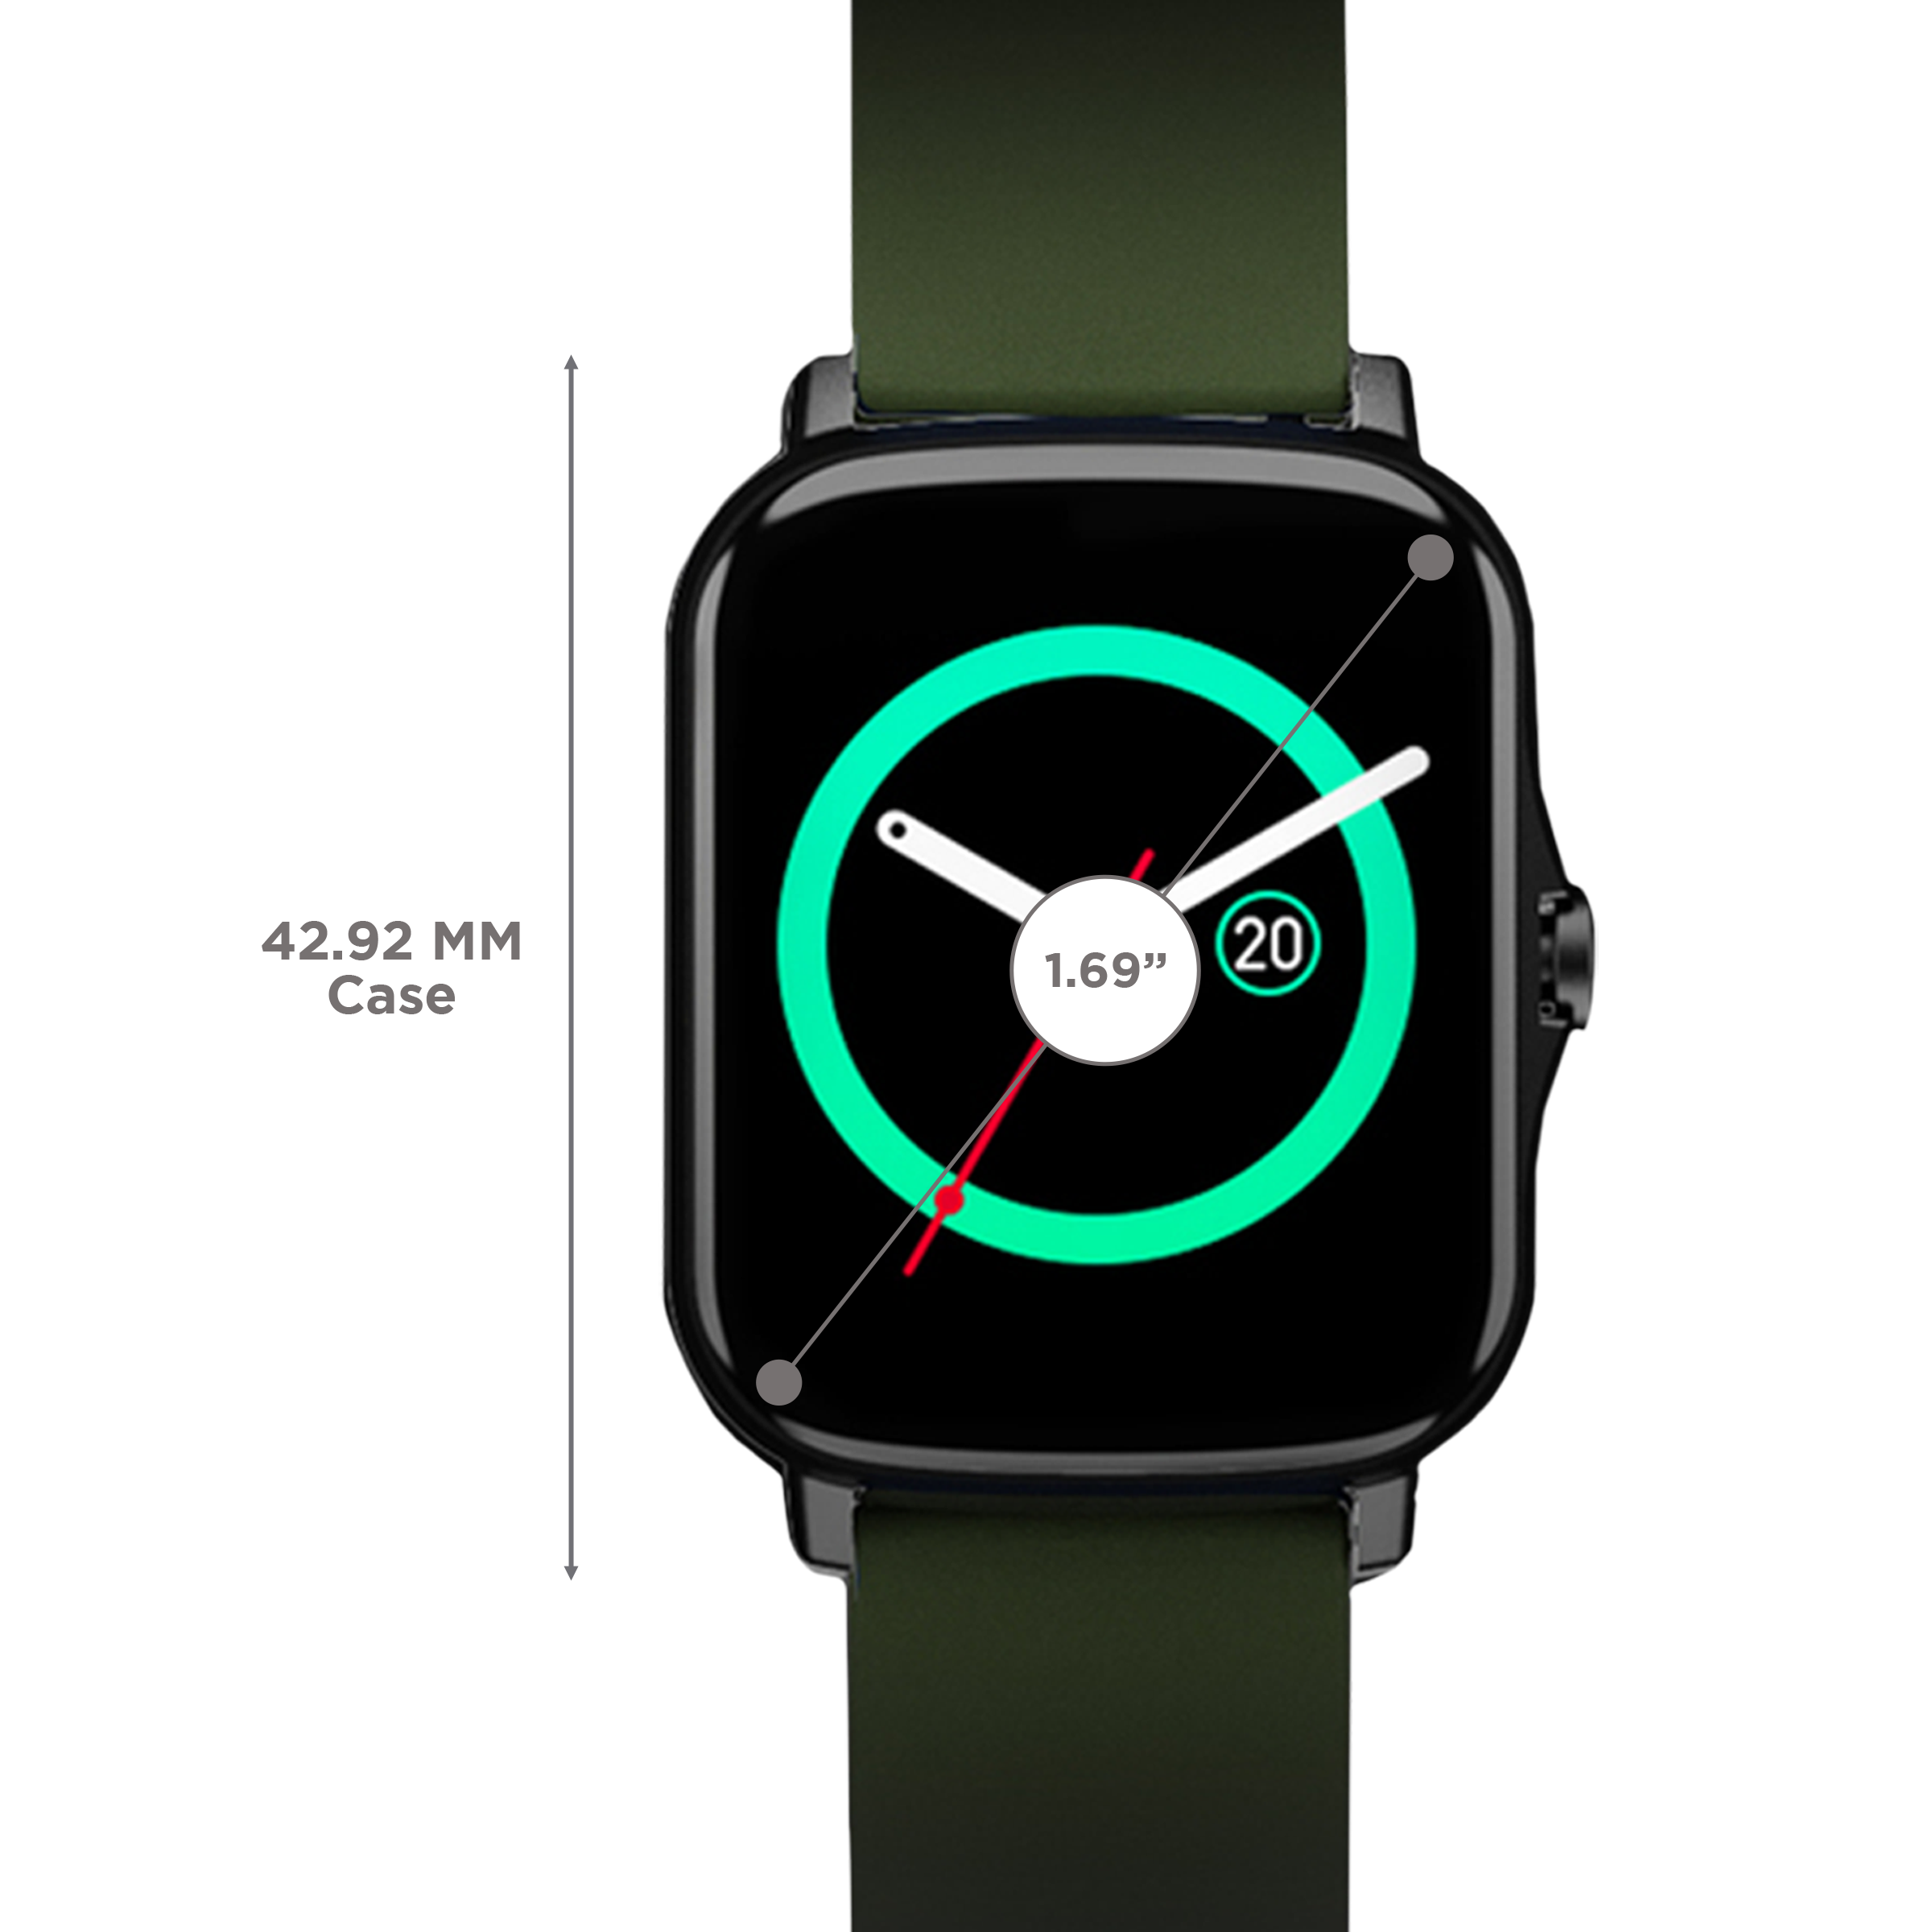 Croma - If you've had your eye on the Apple Watch for a... | Facebook